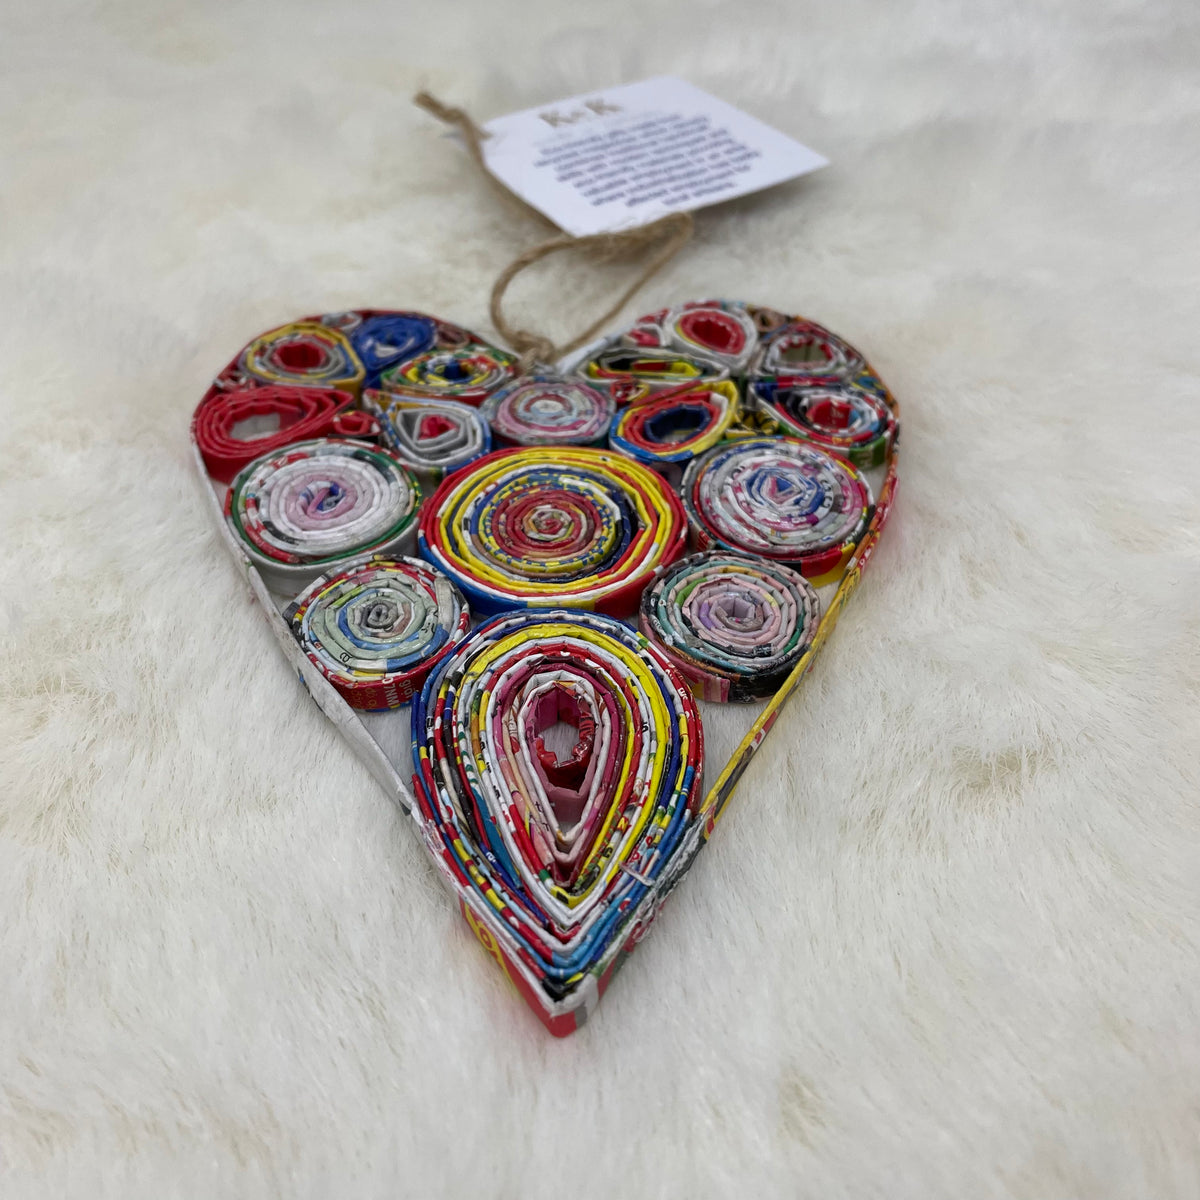 Recycled Newspaper Heart Ornament